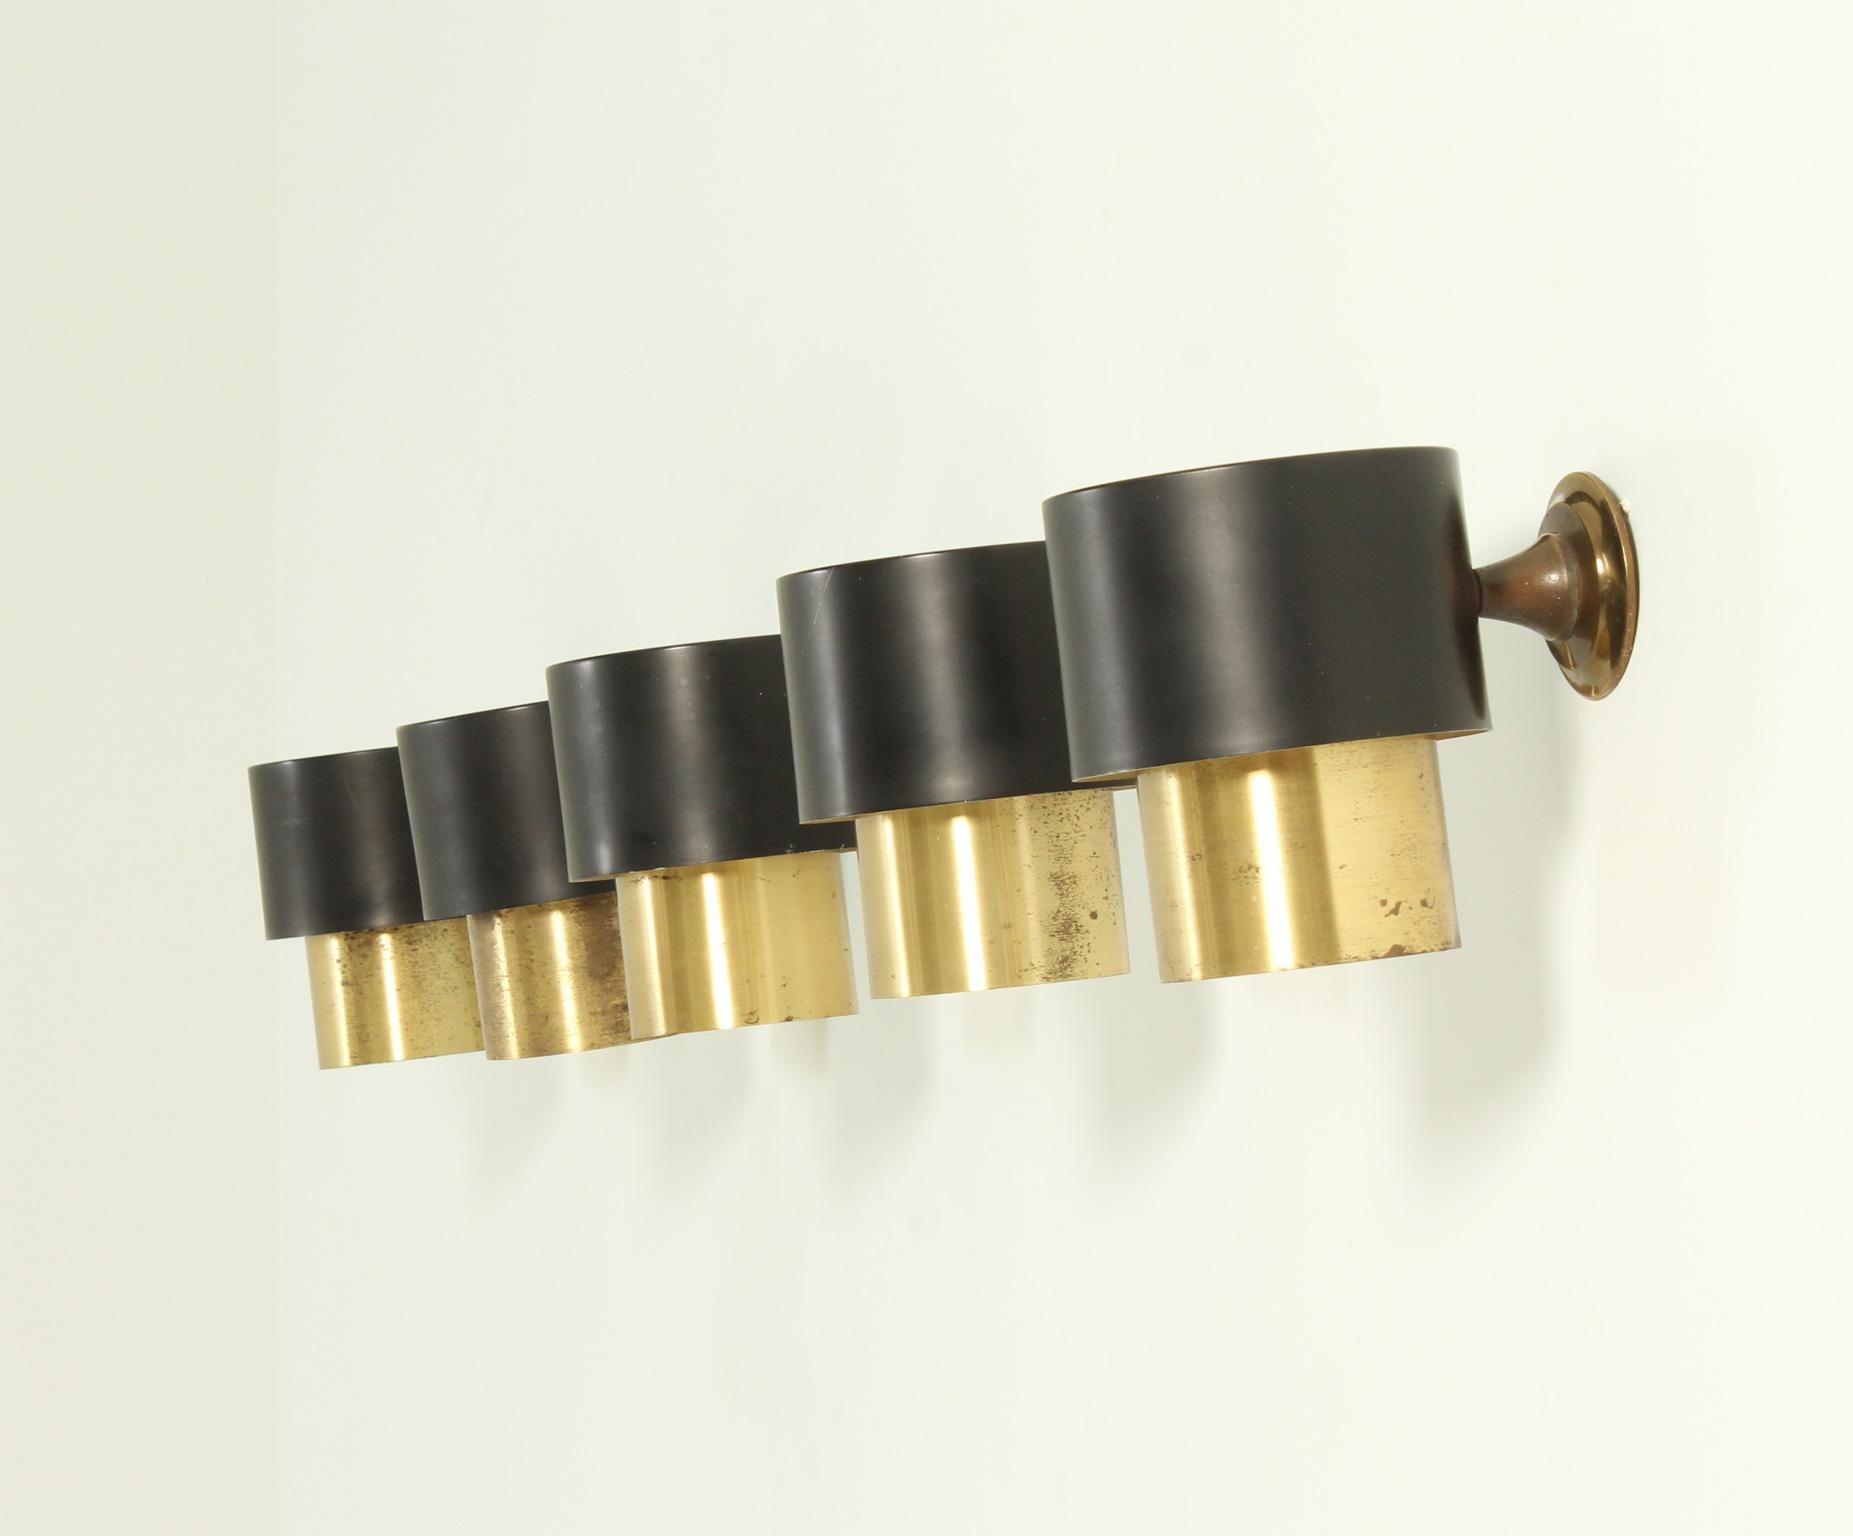 Five Scandinavian Sconces in Brass and Metal, 1960's For Sale 2